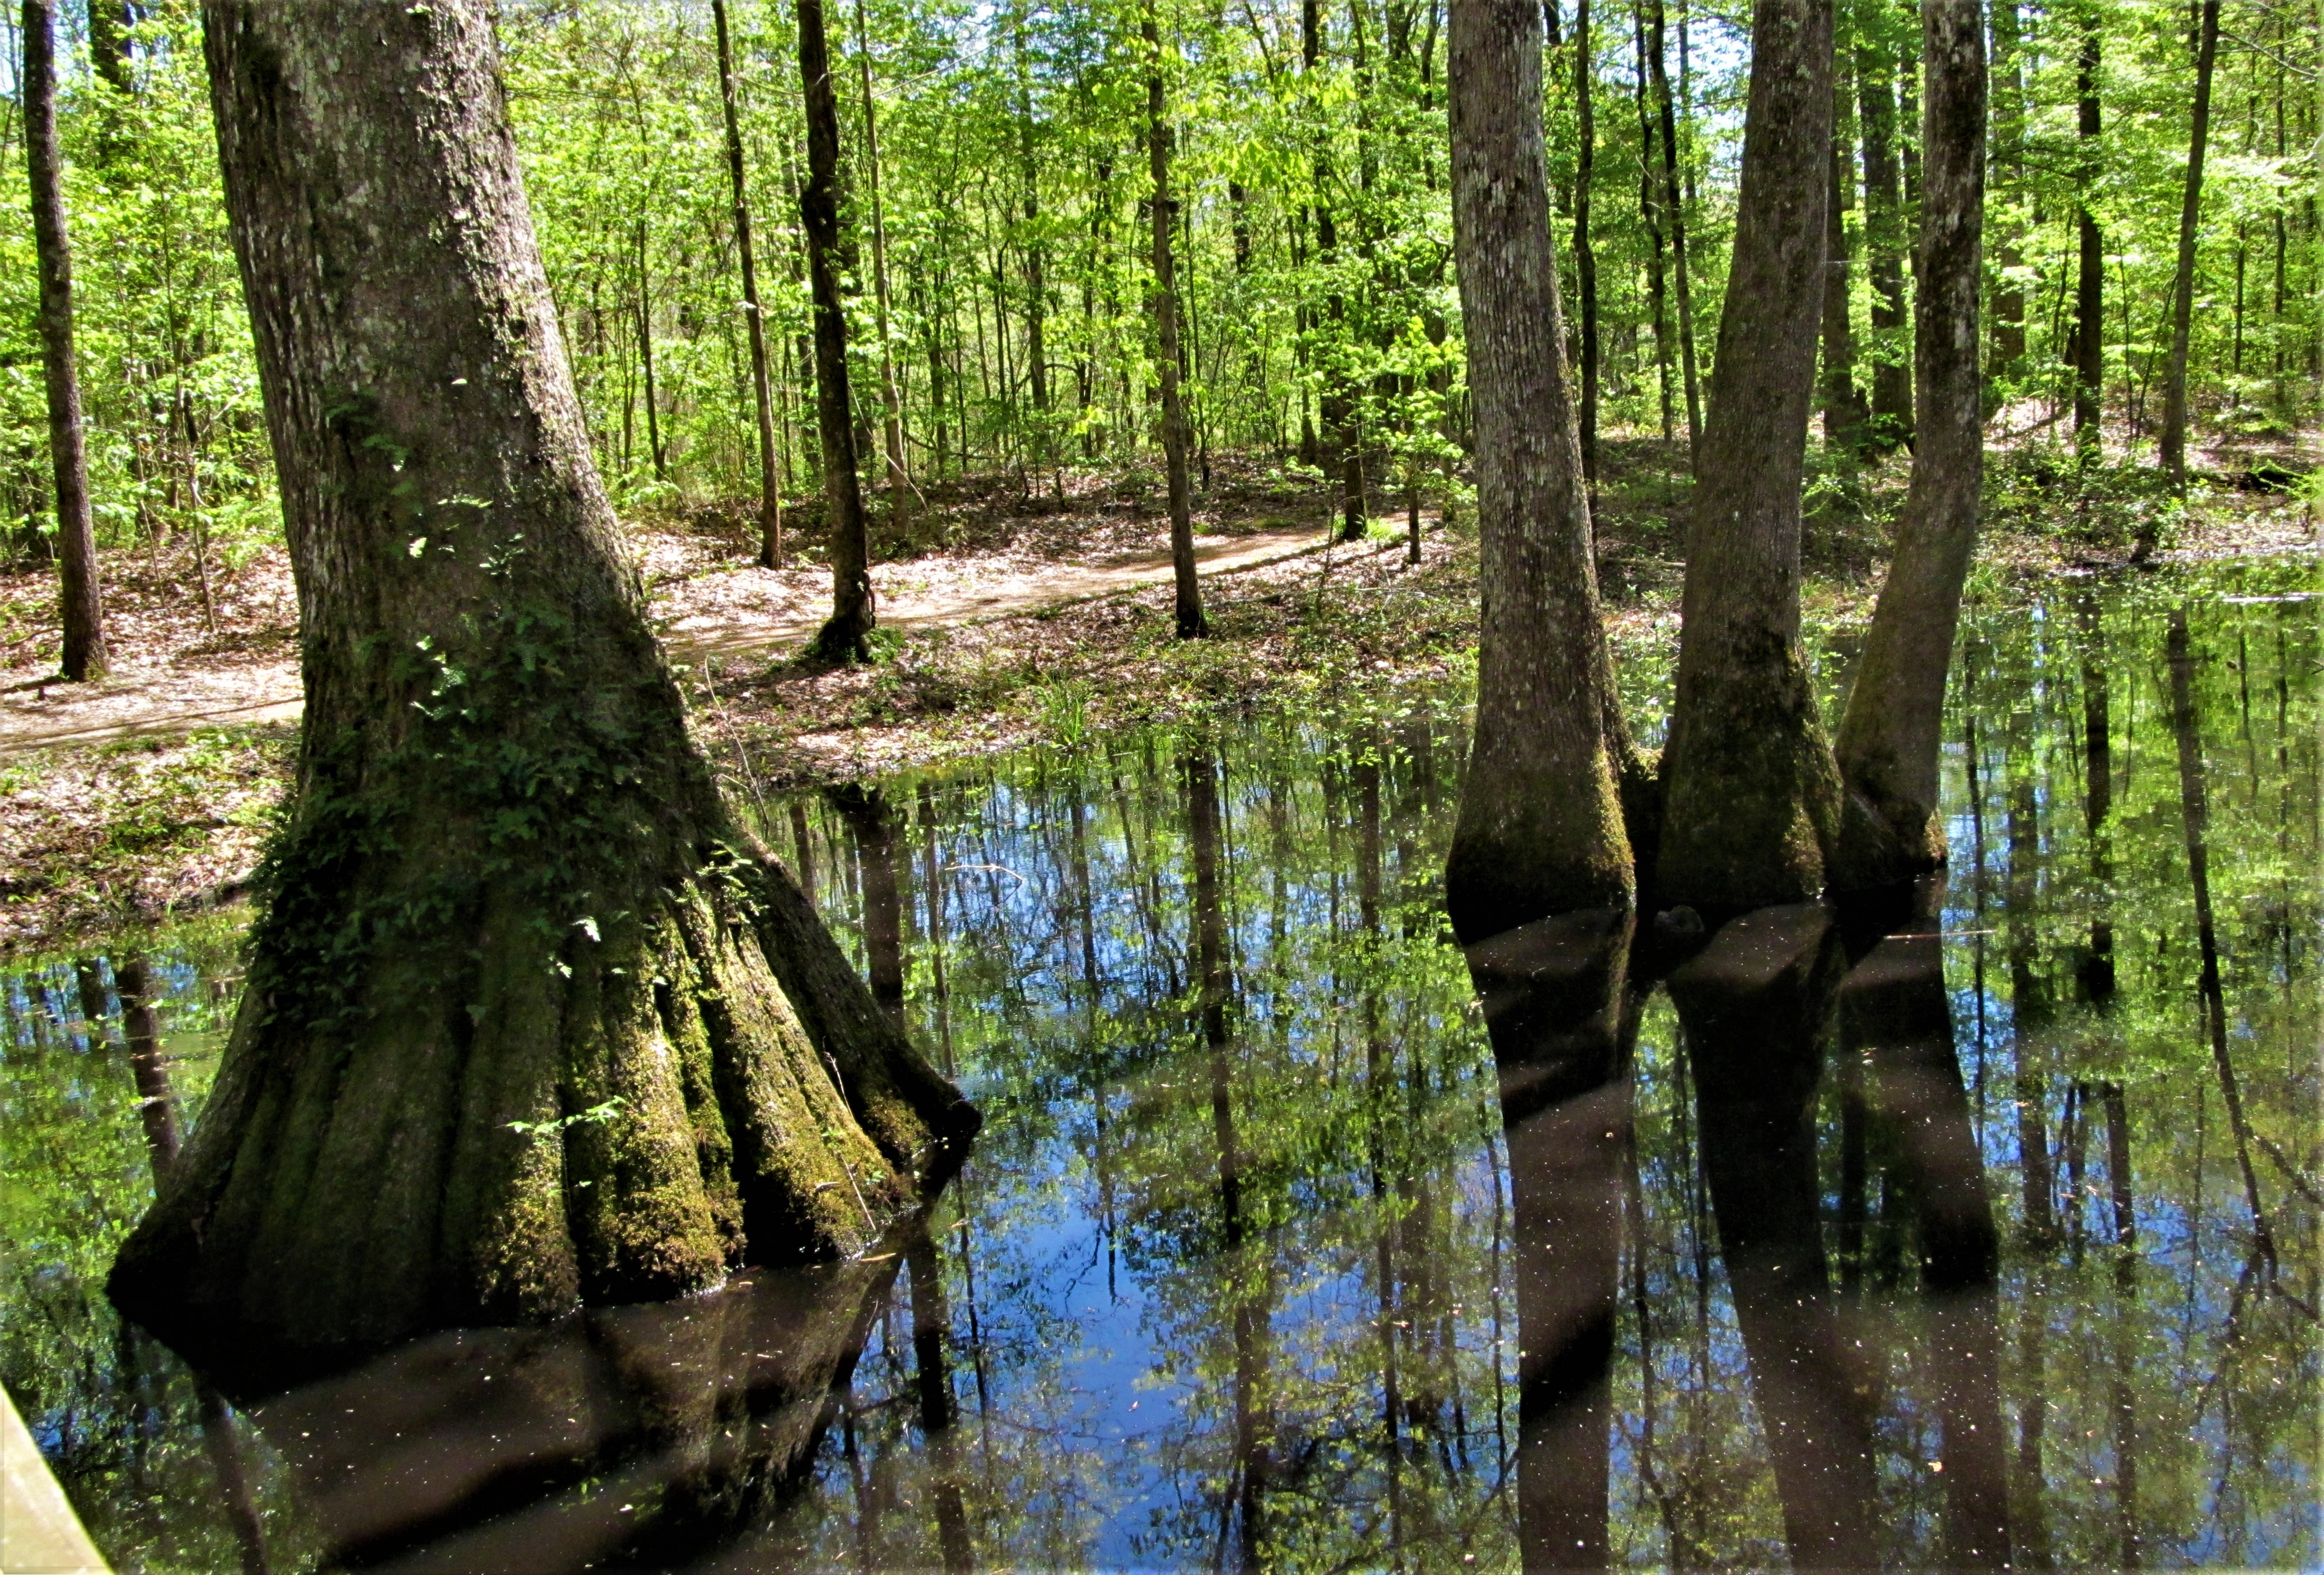 cypress swamp trees 1 march 31